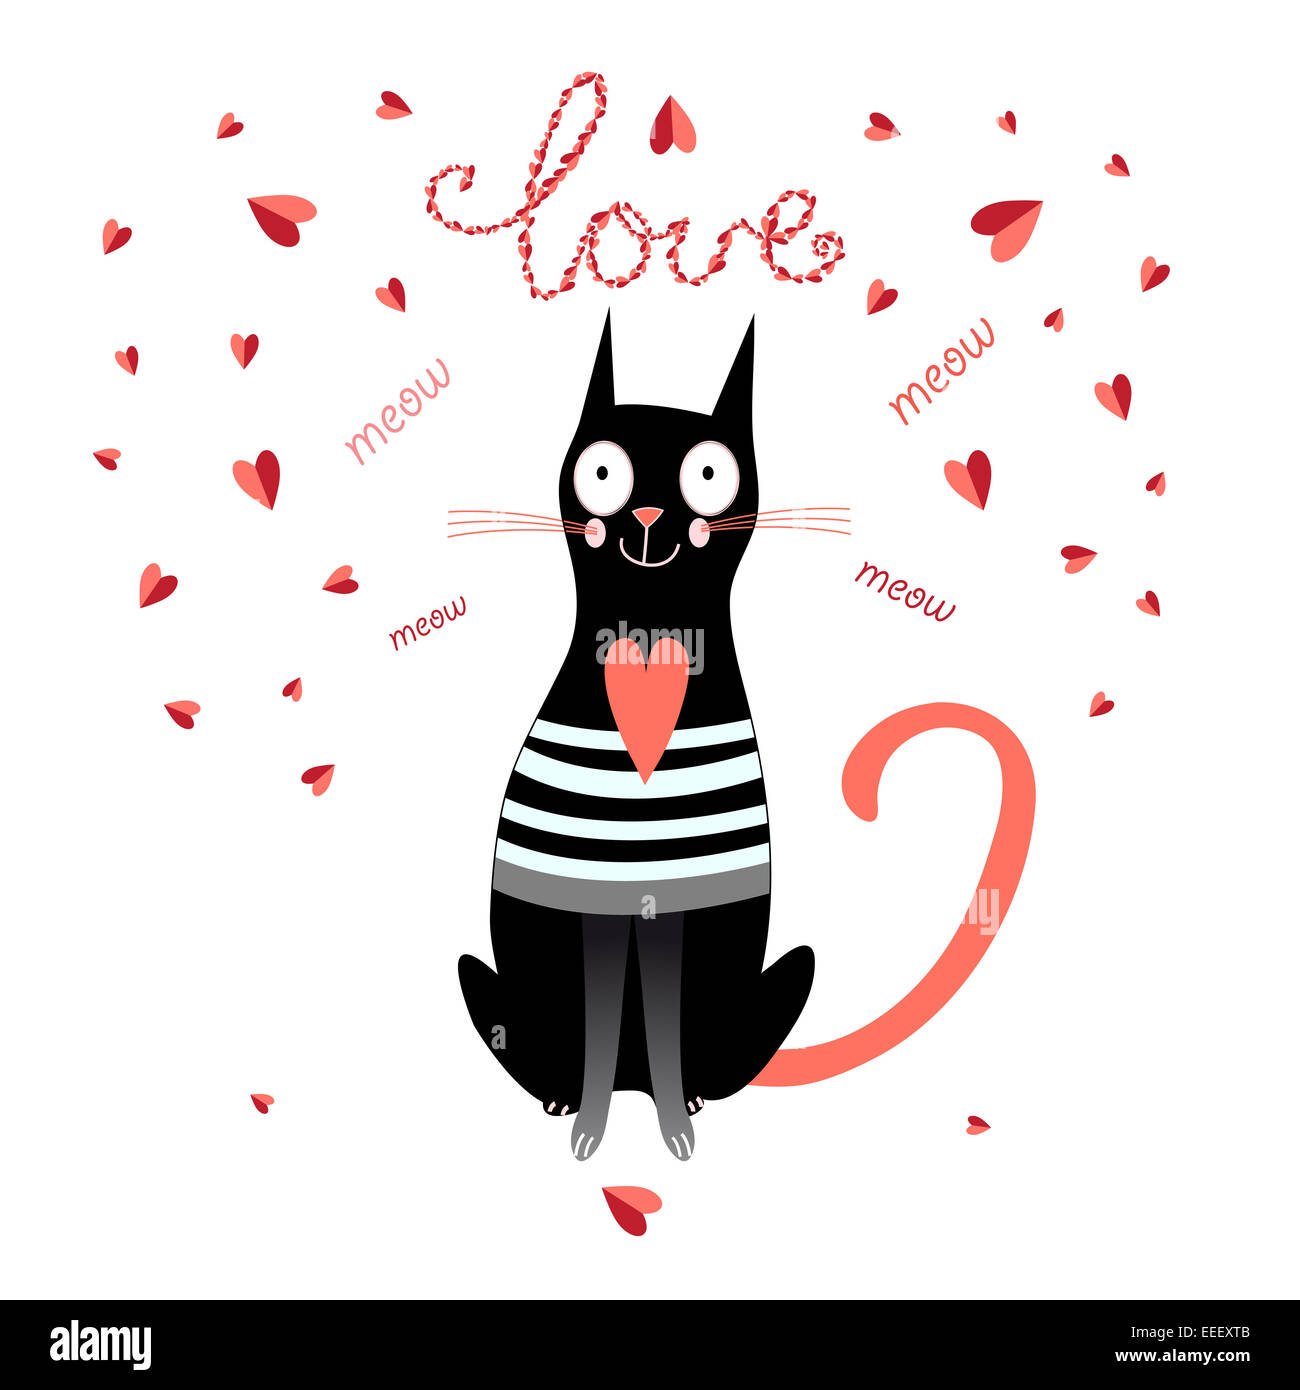 graphic in love funny cat on a white background with hearts Stock Photo